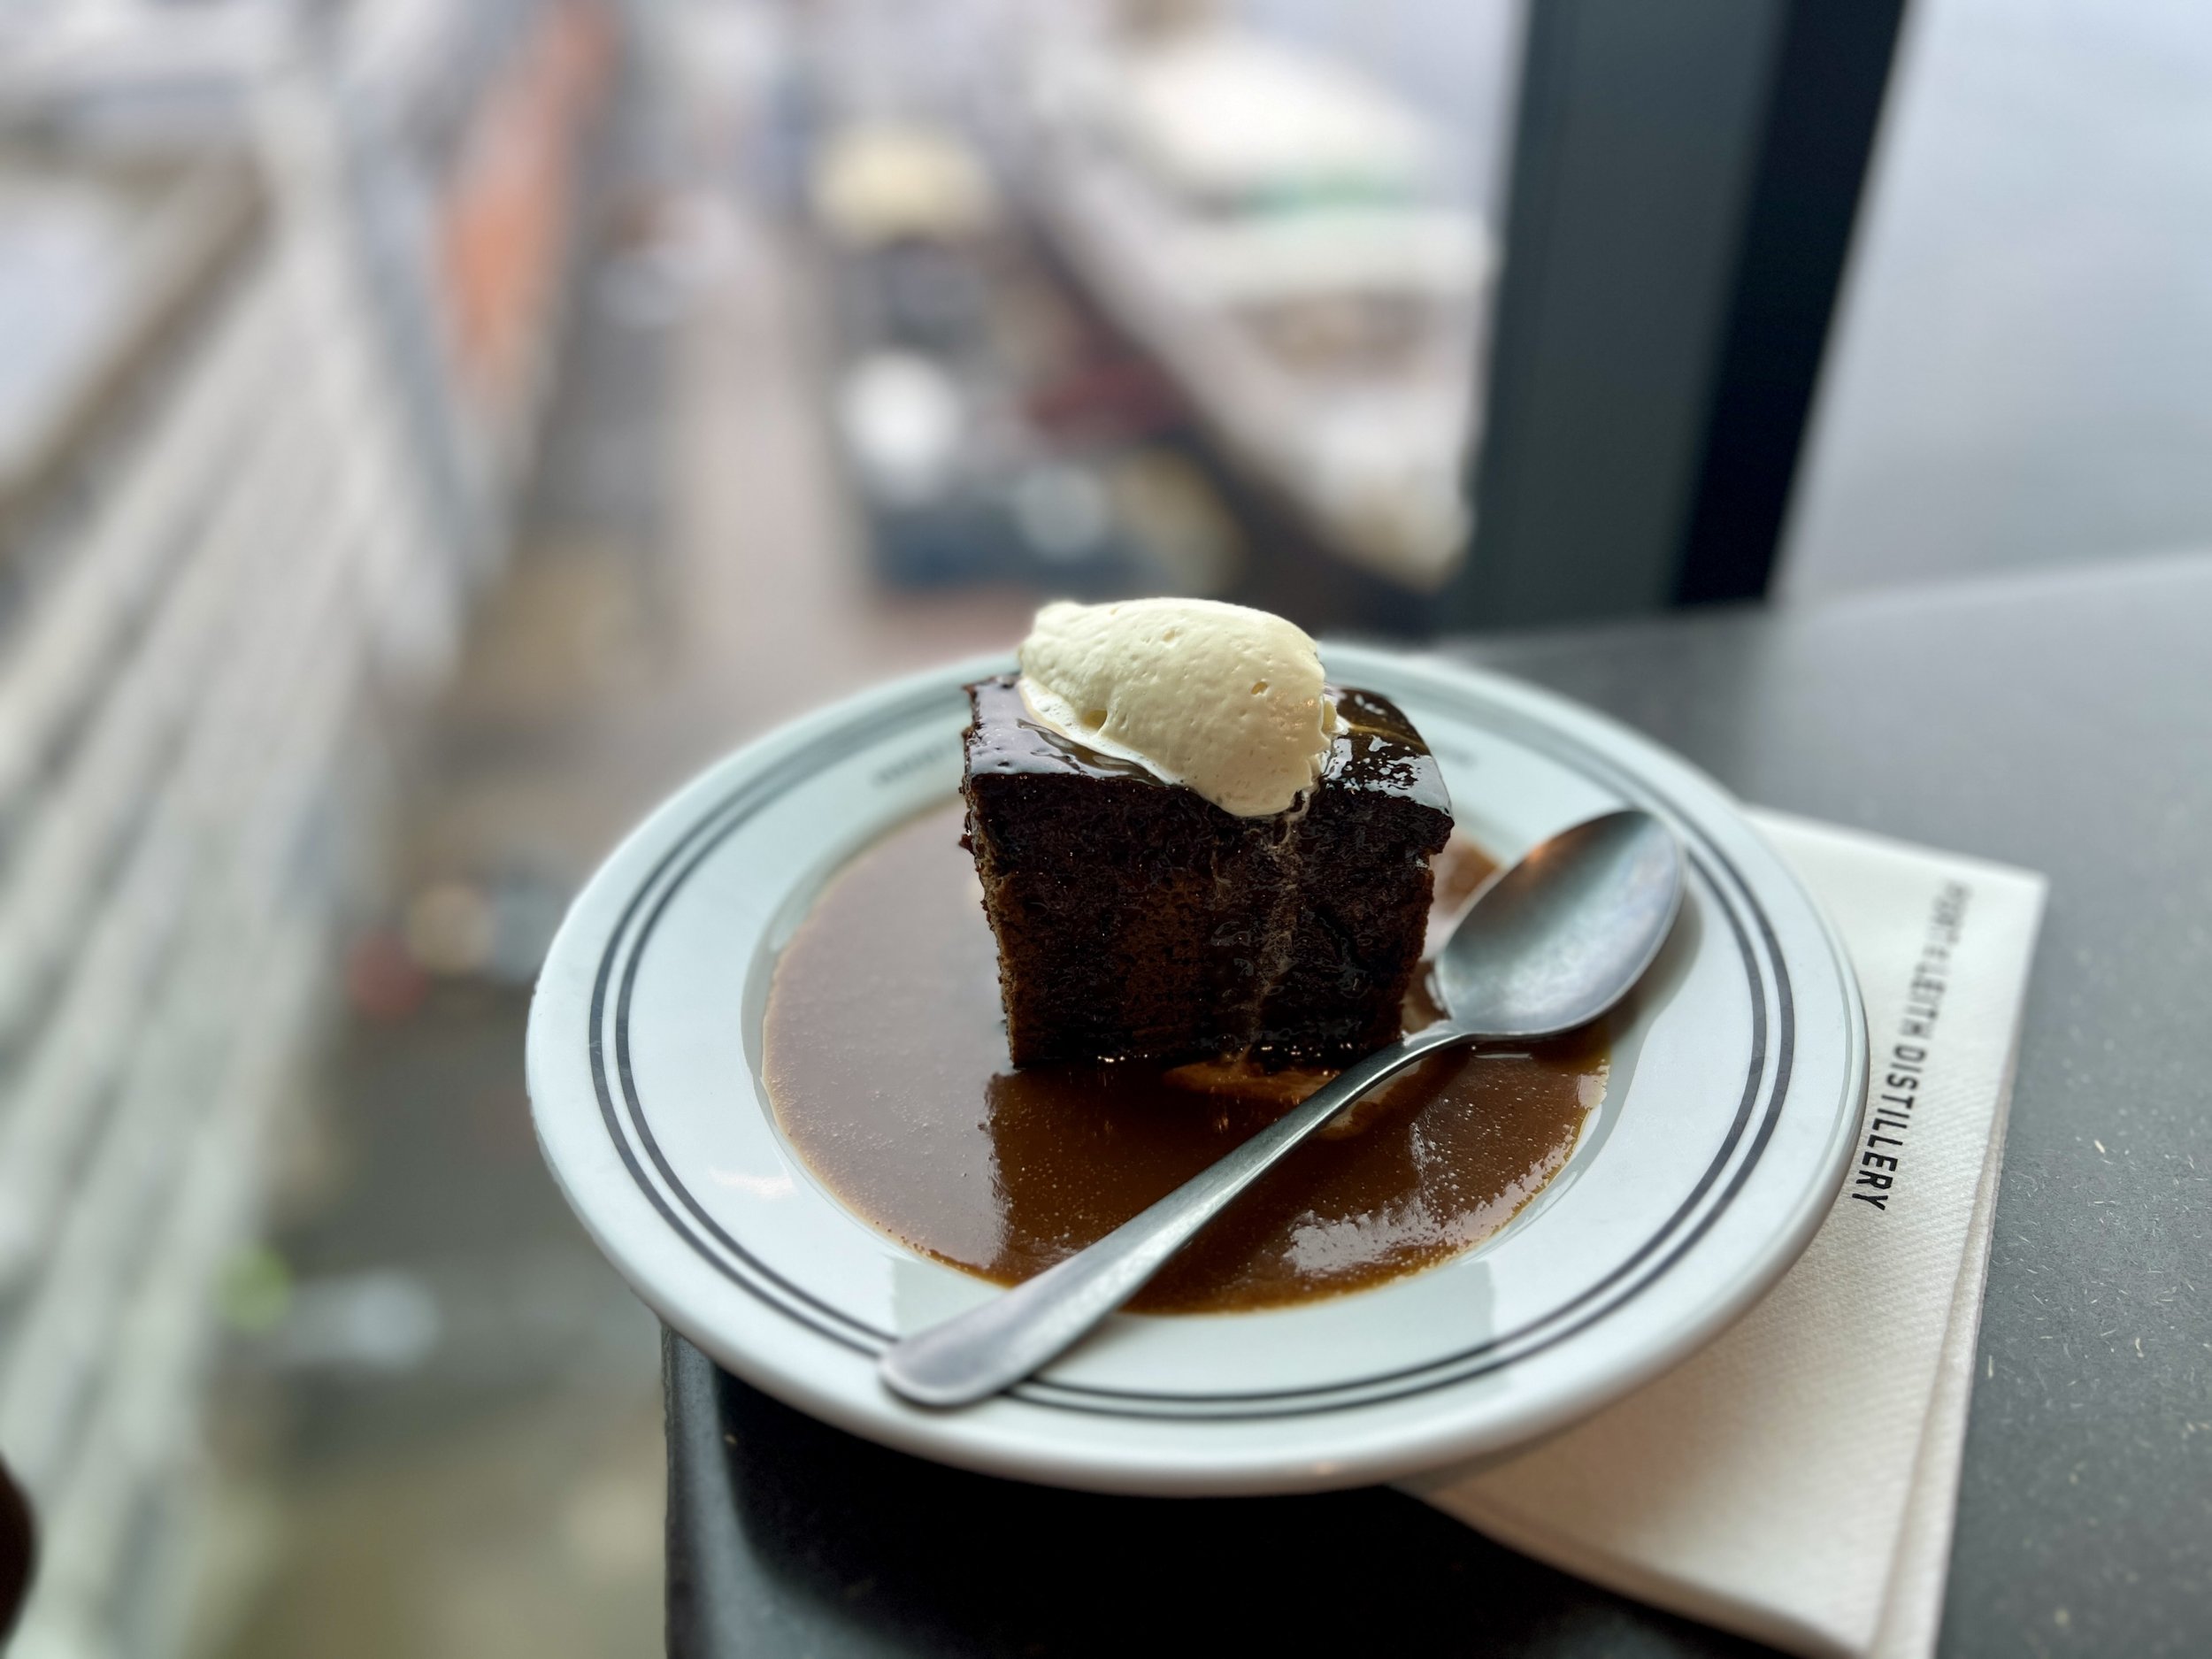  Port of Leith Distillery sticky toffee pudding  